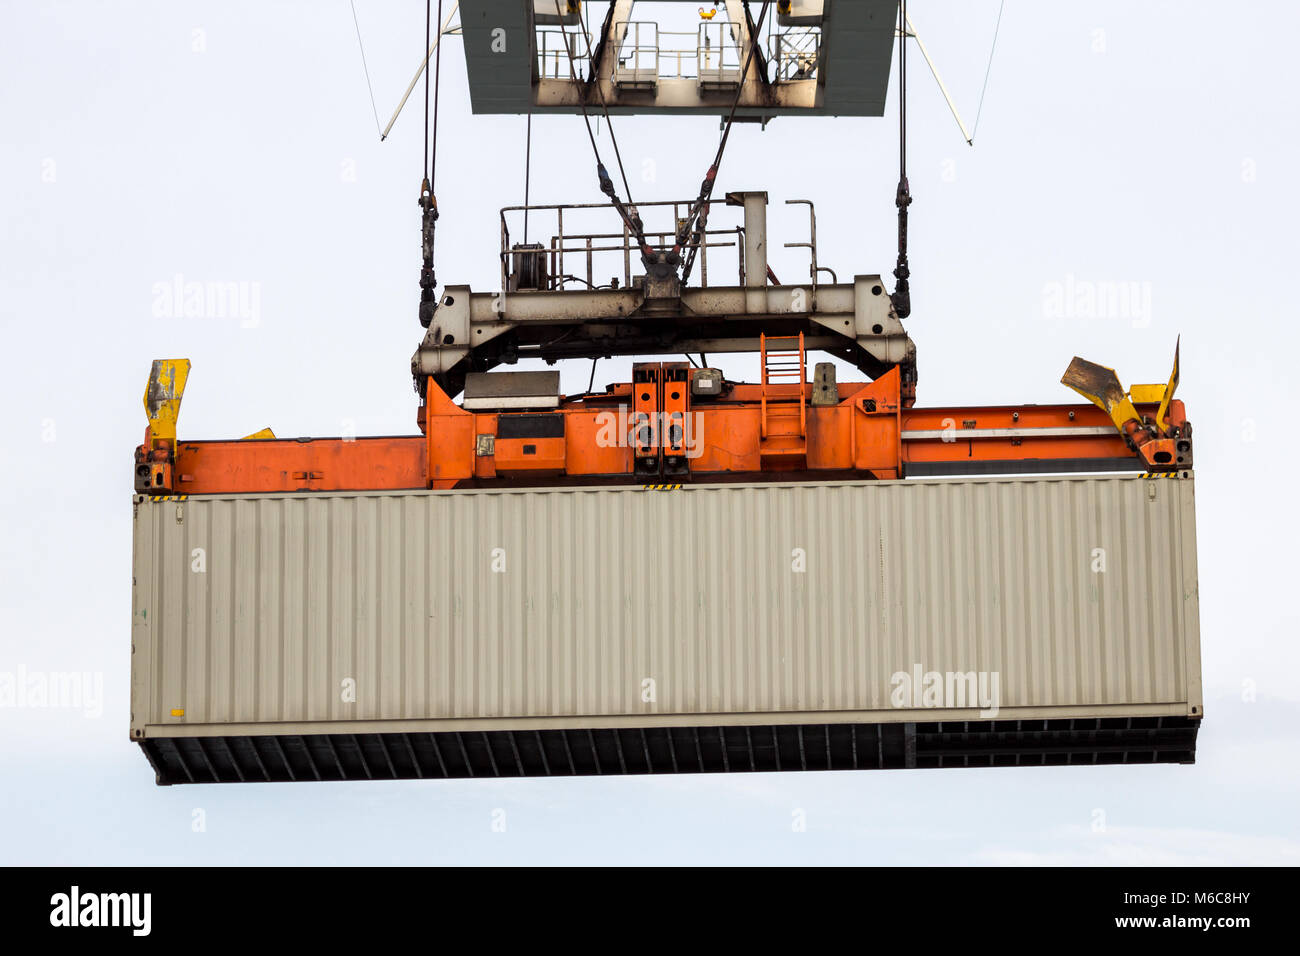 Cargo container lifted by a gantry crane in a industrial shipping terminal in a port. Stock Photo